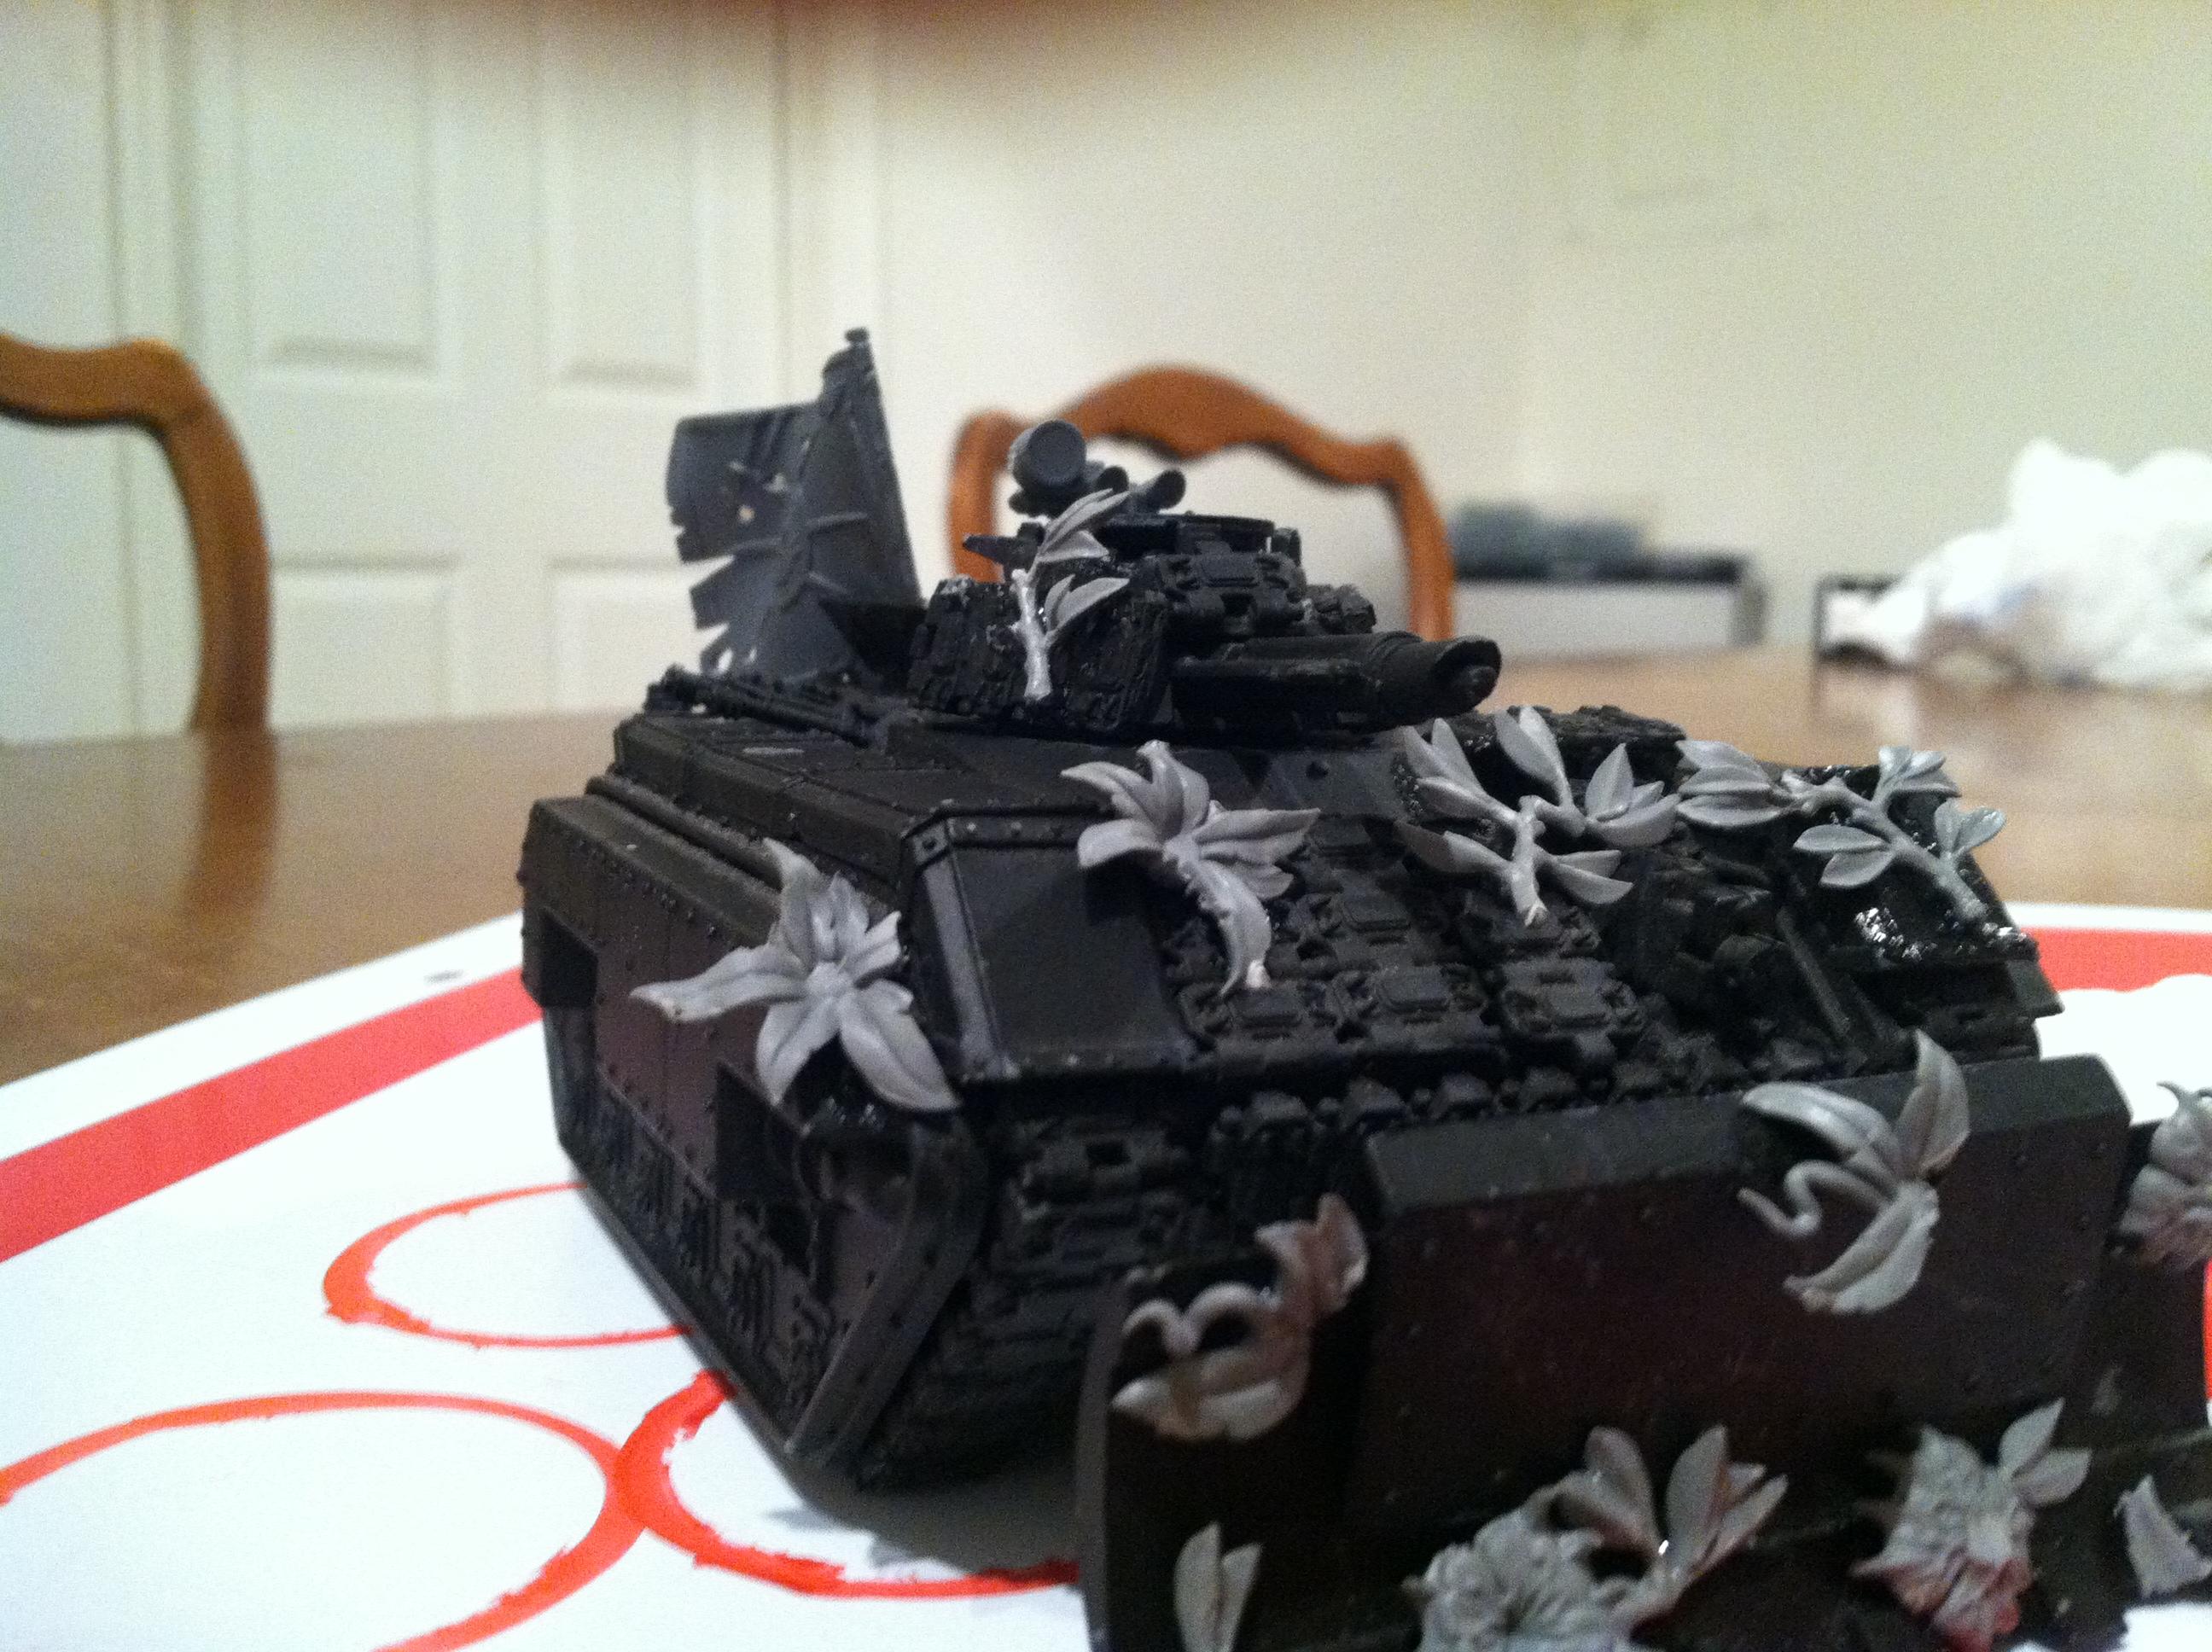 Buddys chimera in progress. It ran over a couple bushes